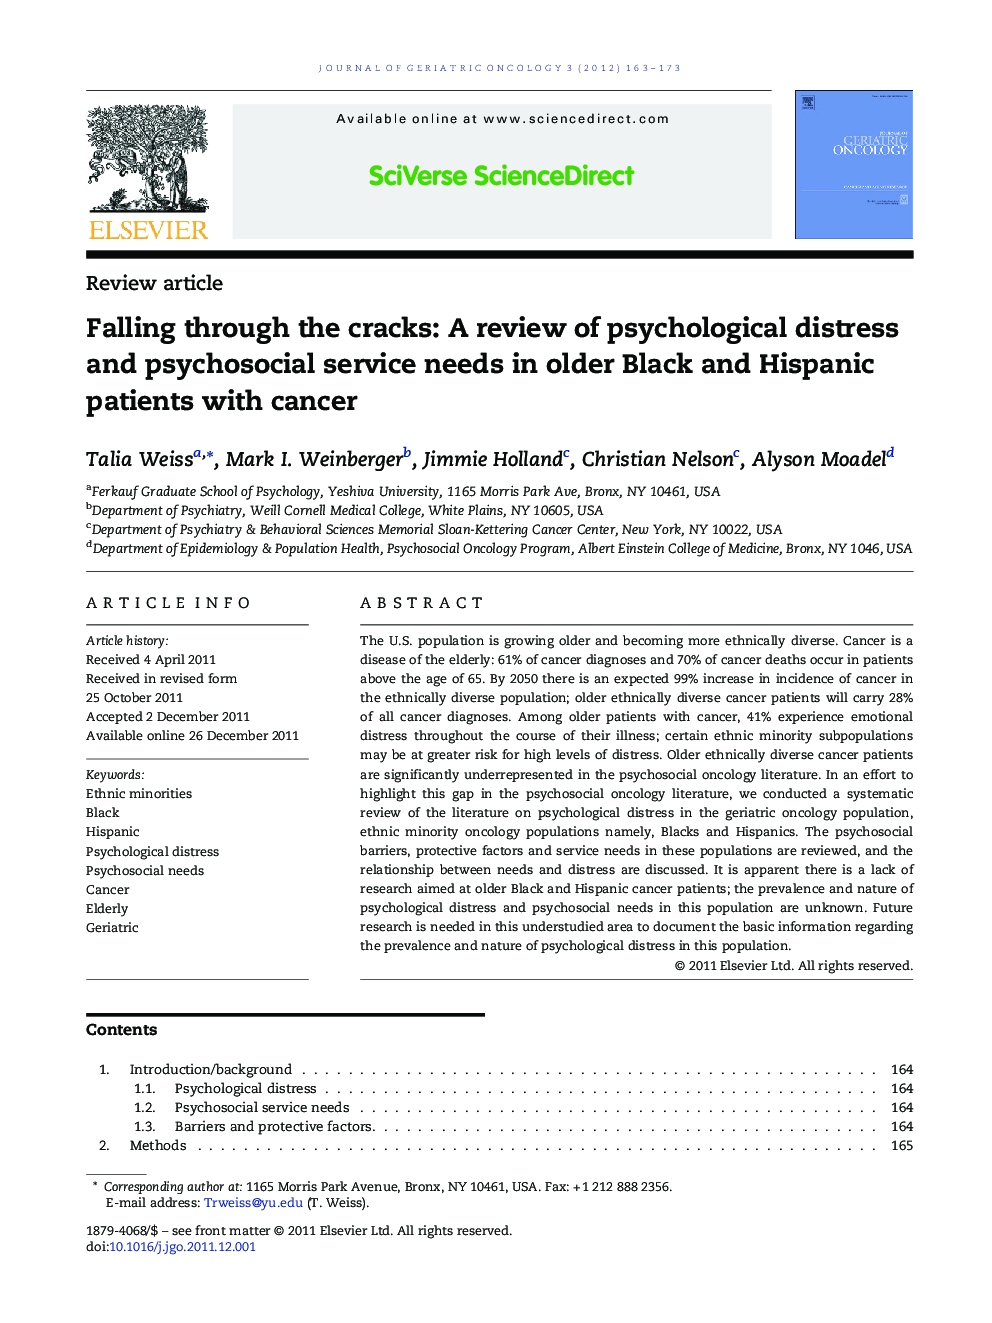 Falling through the cracks: A review of psychological distress and psychosocial service needs in older Black and Hispanic patients with cancer